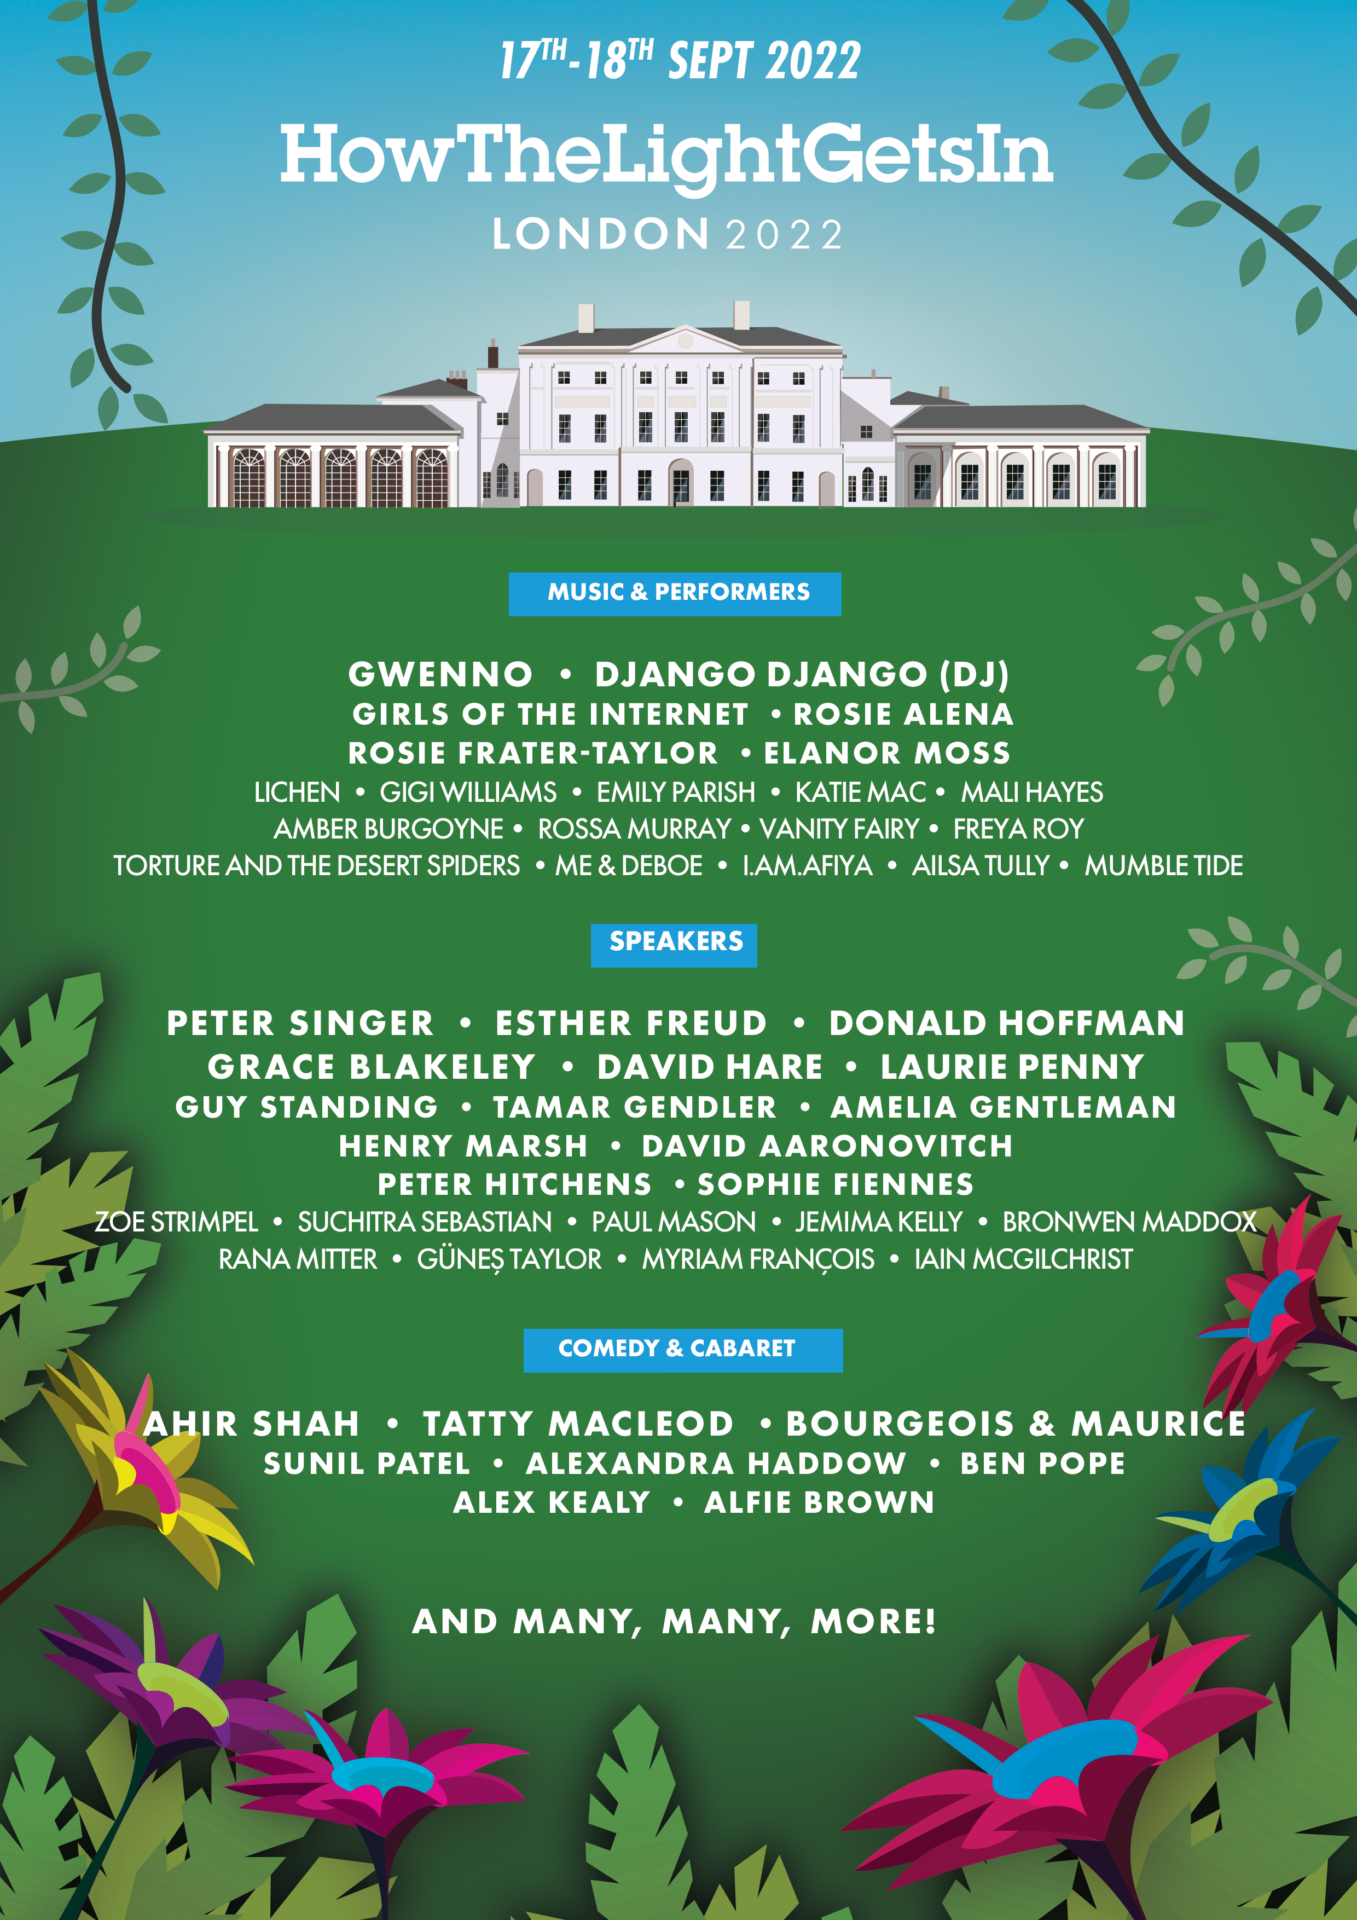 NEWS: HowTheLightGetsIn Festival announces full music and comedy line-up 1